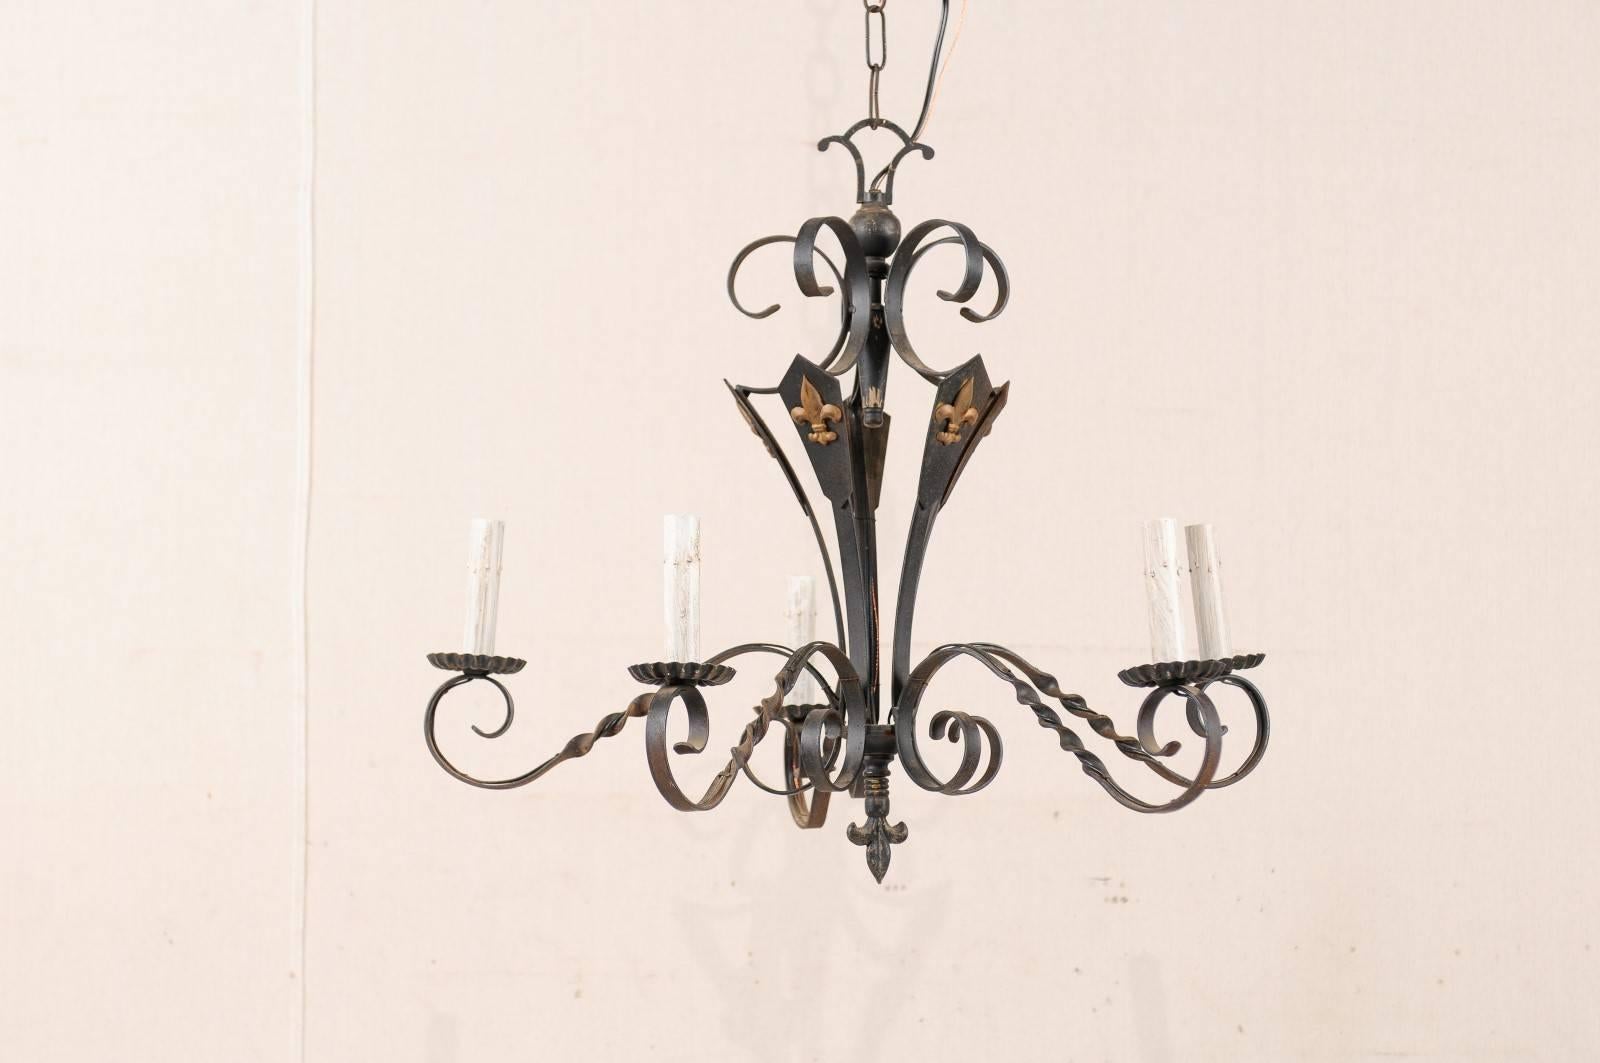 A French five-light dark colored iron chandelier with painted gold accents. This French vintage mid-20th century chandelier features five s-scrolled and twisted arms which each support the metal bobeches and painted candle sleeves. The central body